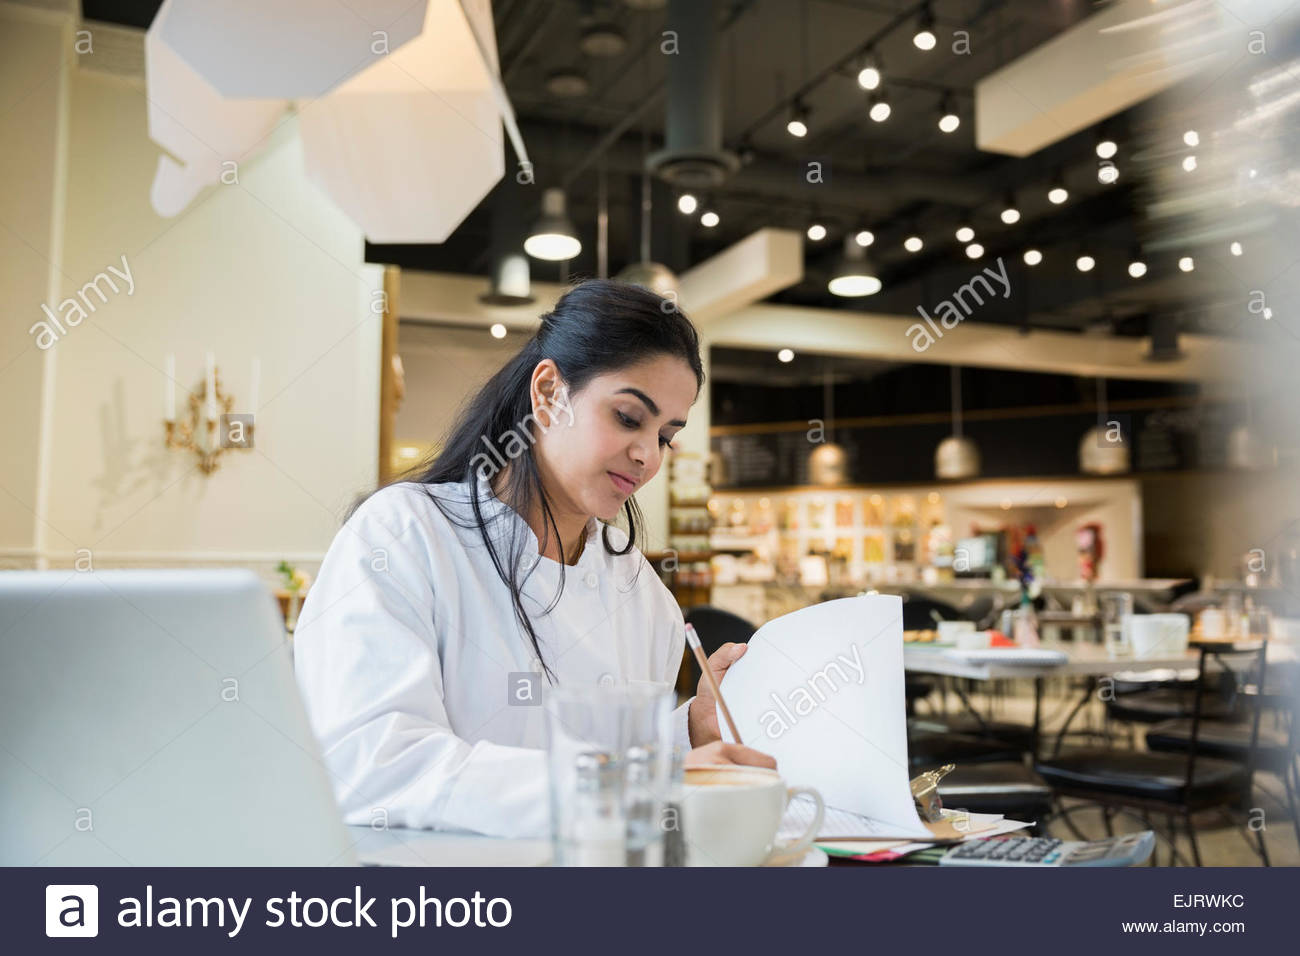 Chef working on paperwork in cafe Stock Photo